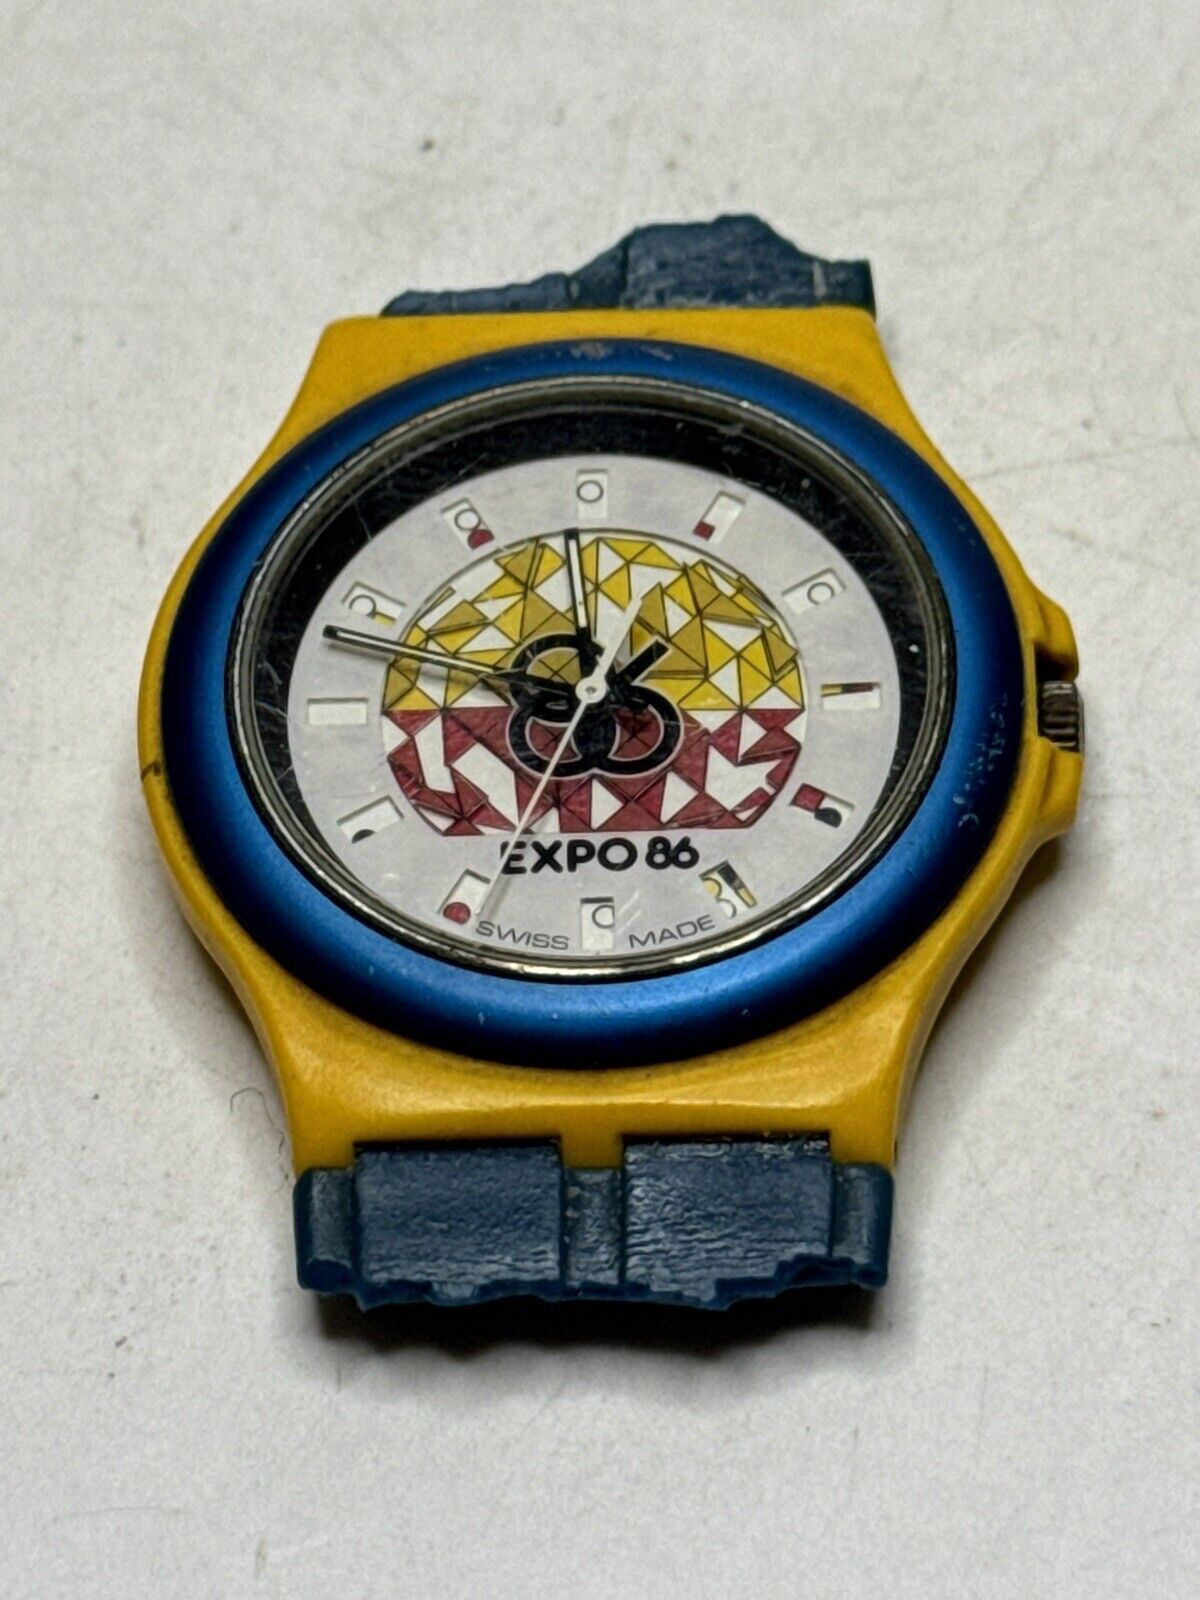 Vtg Expo 86 Swatch Quartz Watch By Swatch Swiss Made Blue/Yellow Vancouver Expo